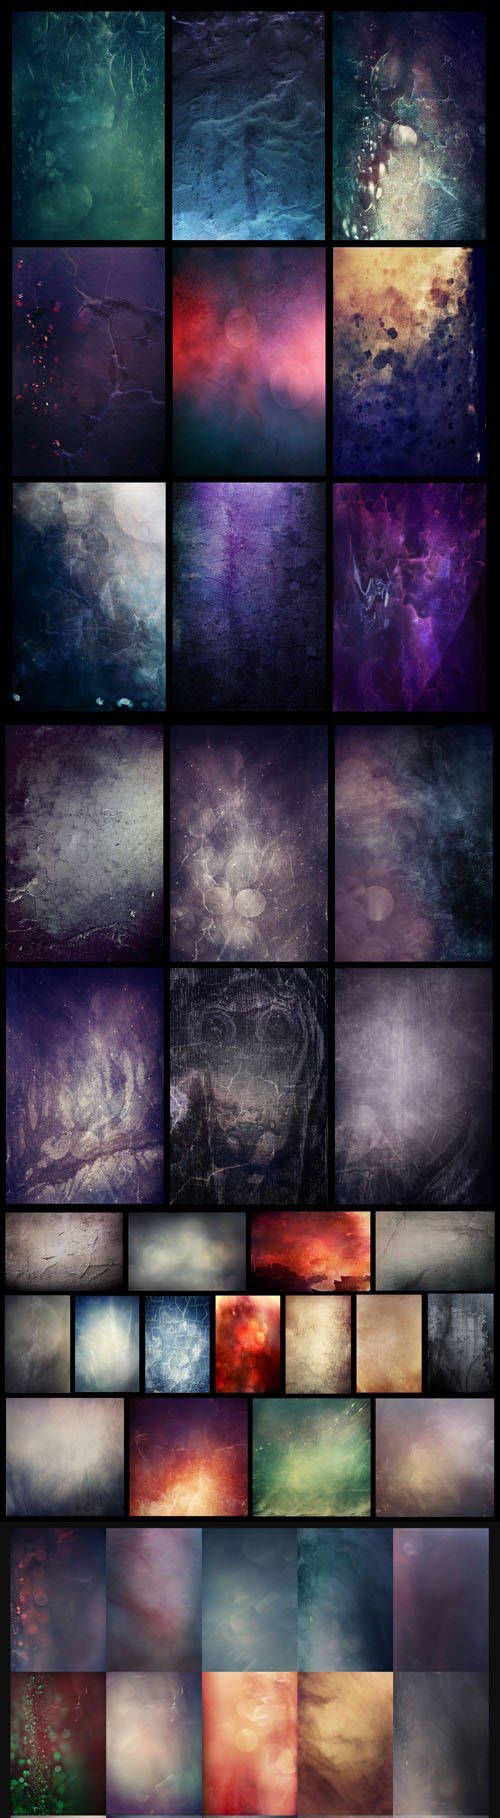 45 Awesome Abstract Textures Pack